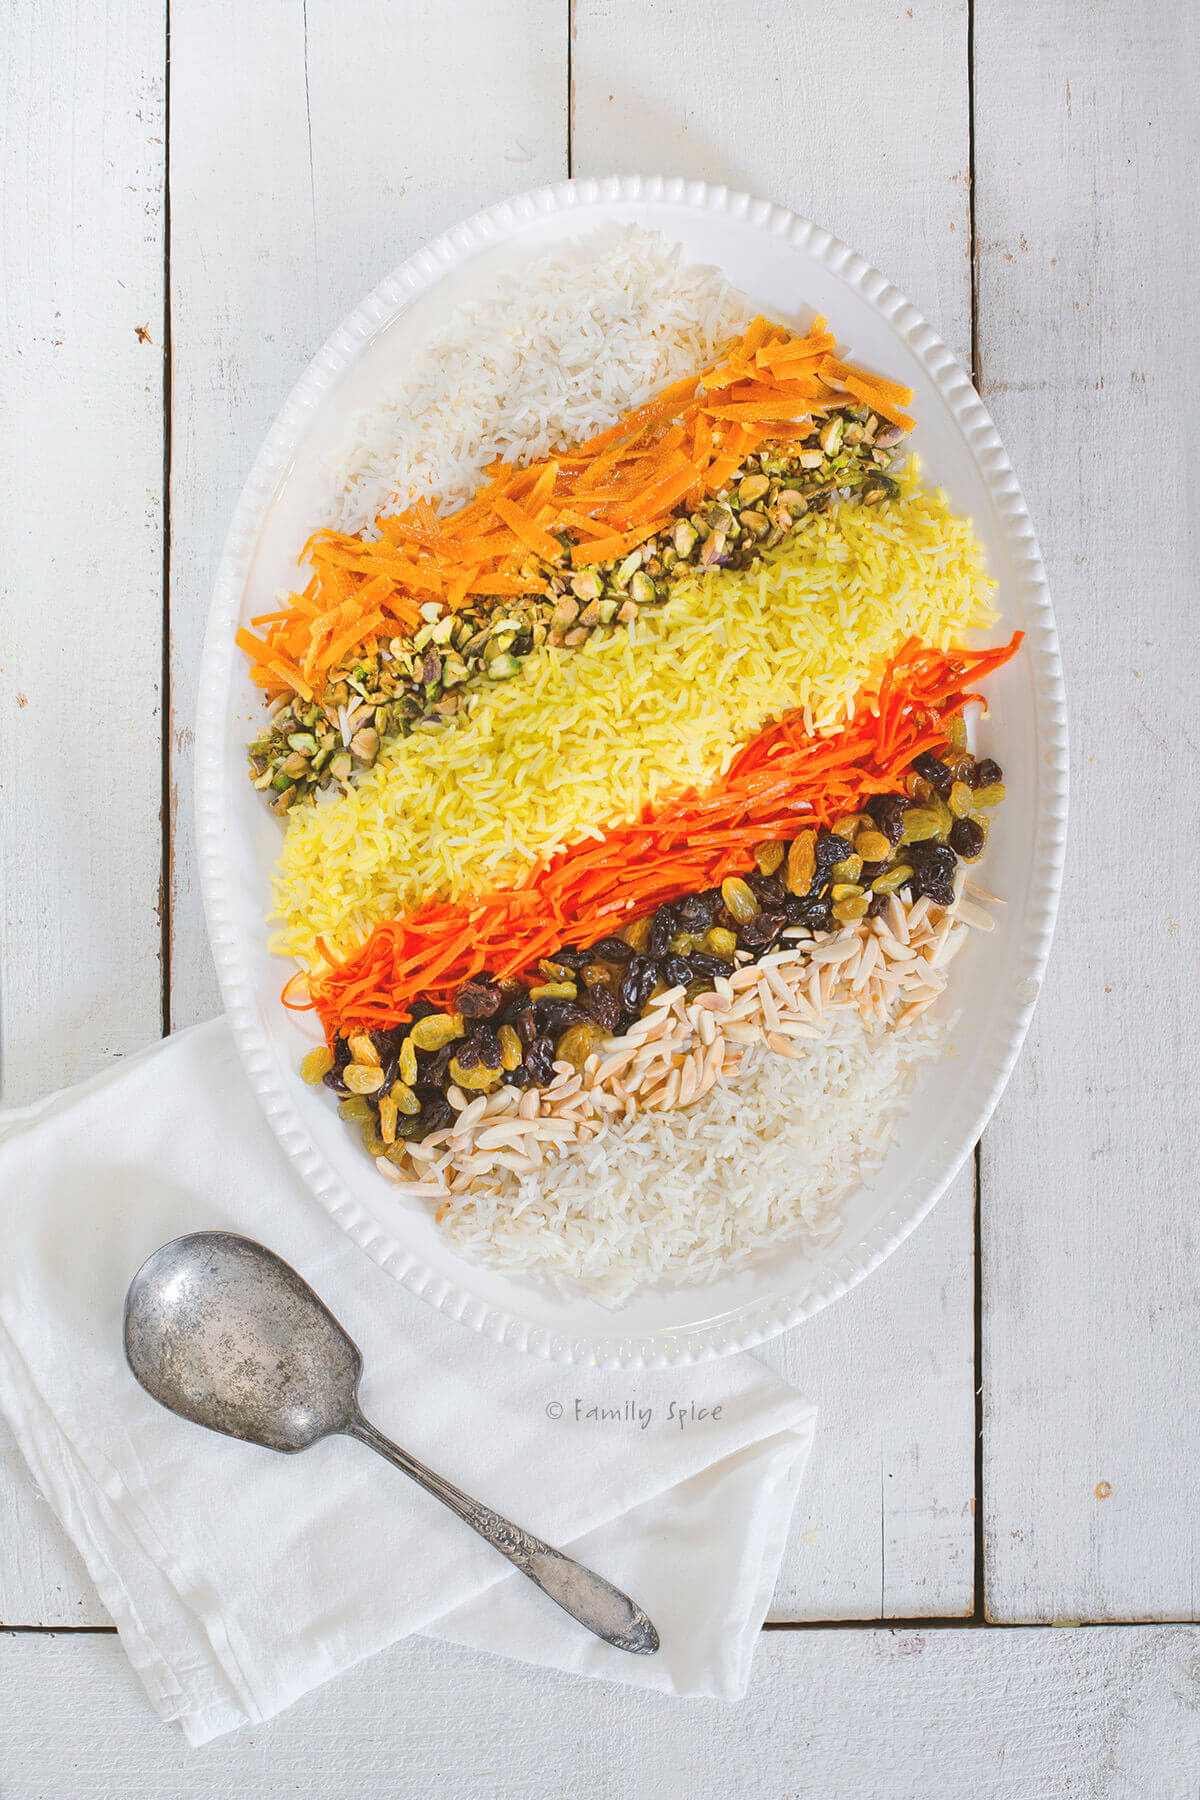 A platter of shirin polo (persian sweet rice) topped with candied orange slices, carrots, pistachios, almond slivers and saffron